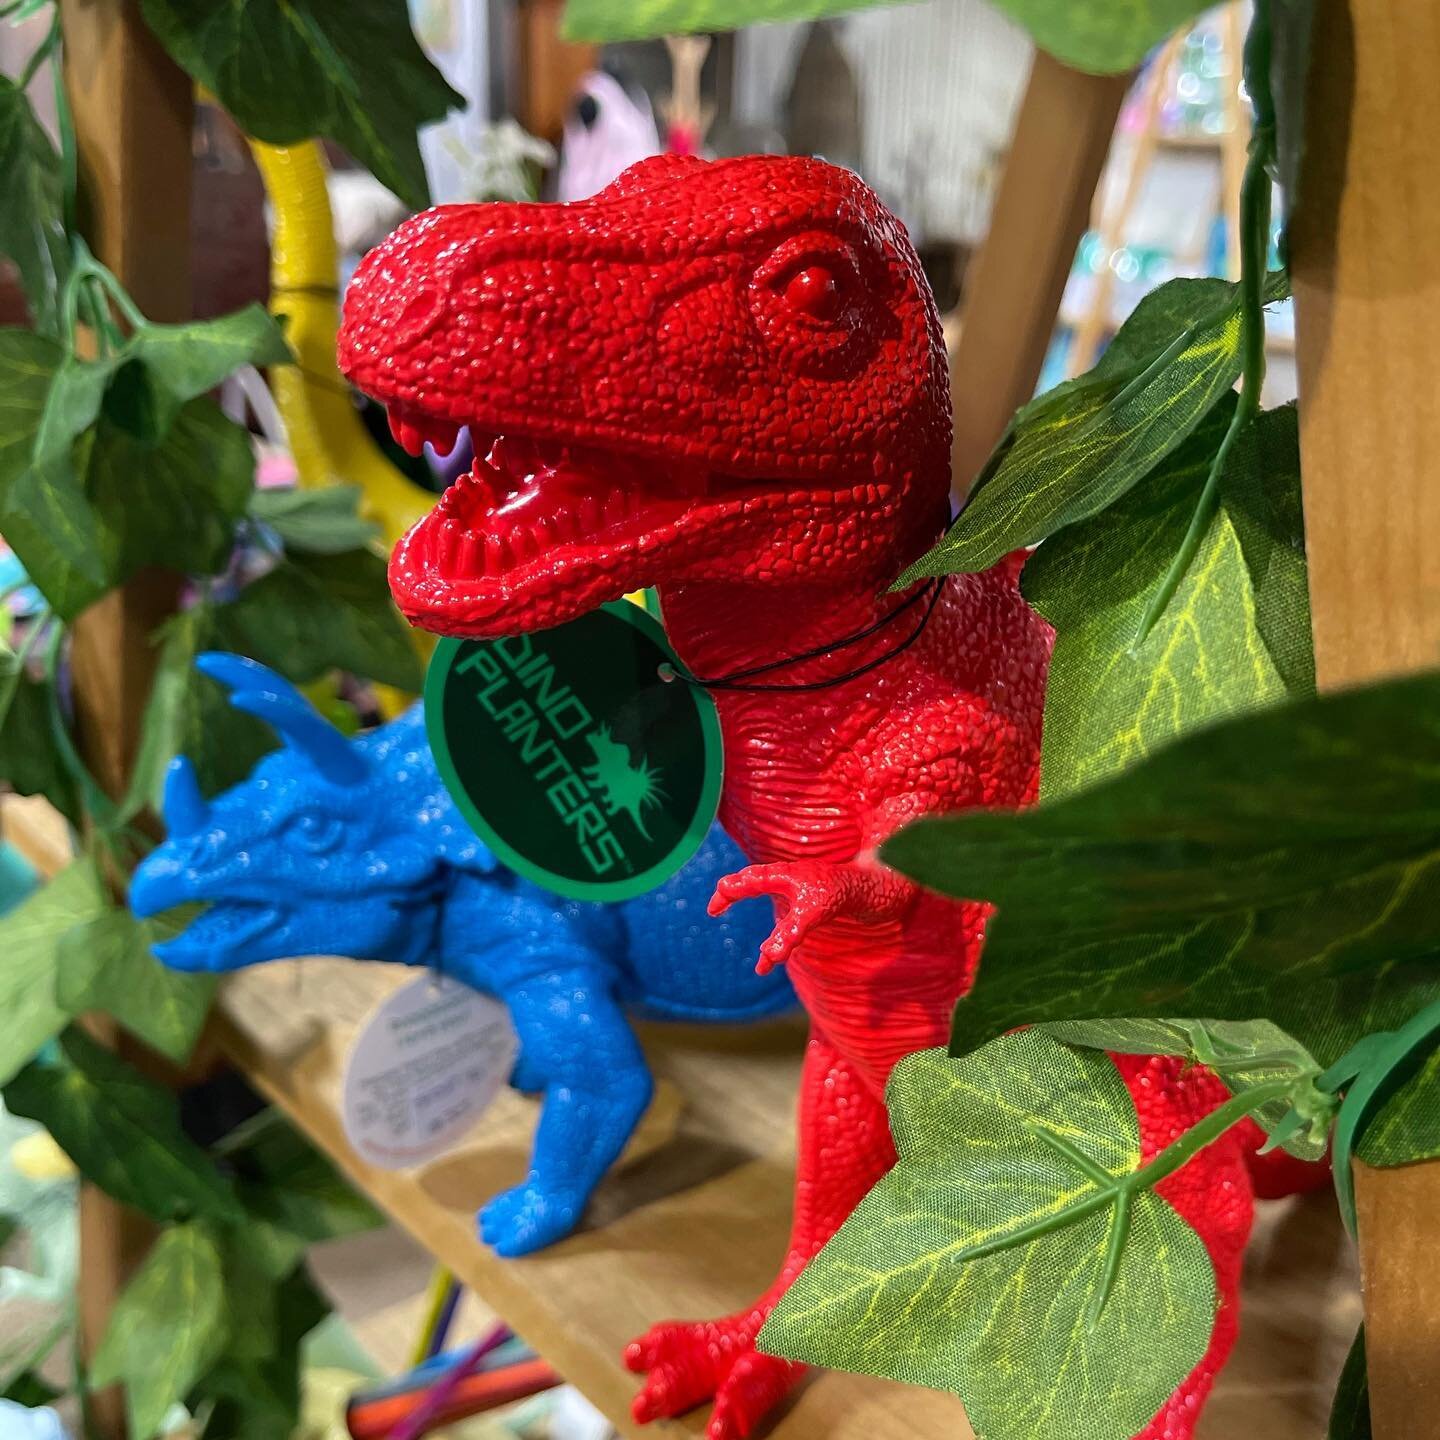 Dinoplanters have been restocked at Anna &amp; Co in Uralla, just in time for the weekend! @anna.andco.homewares 

How cool is the small red T-Rex! 🚒

#dinoplanter #dinoplanters #handpainted #dinosaurplanter #planter #planters #indoorplantsdecor #pl